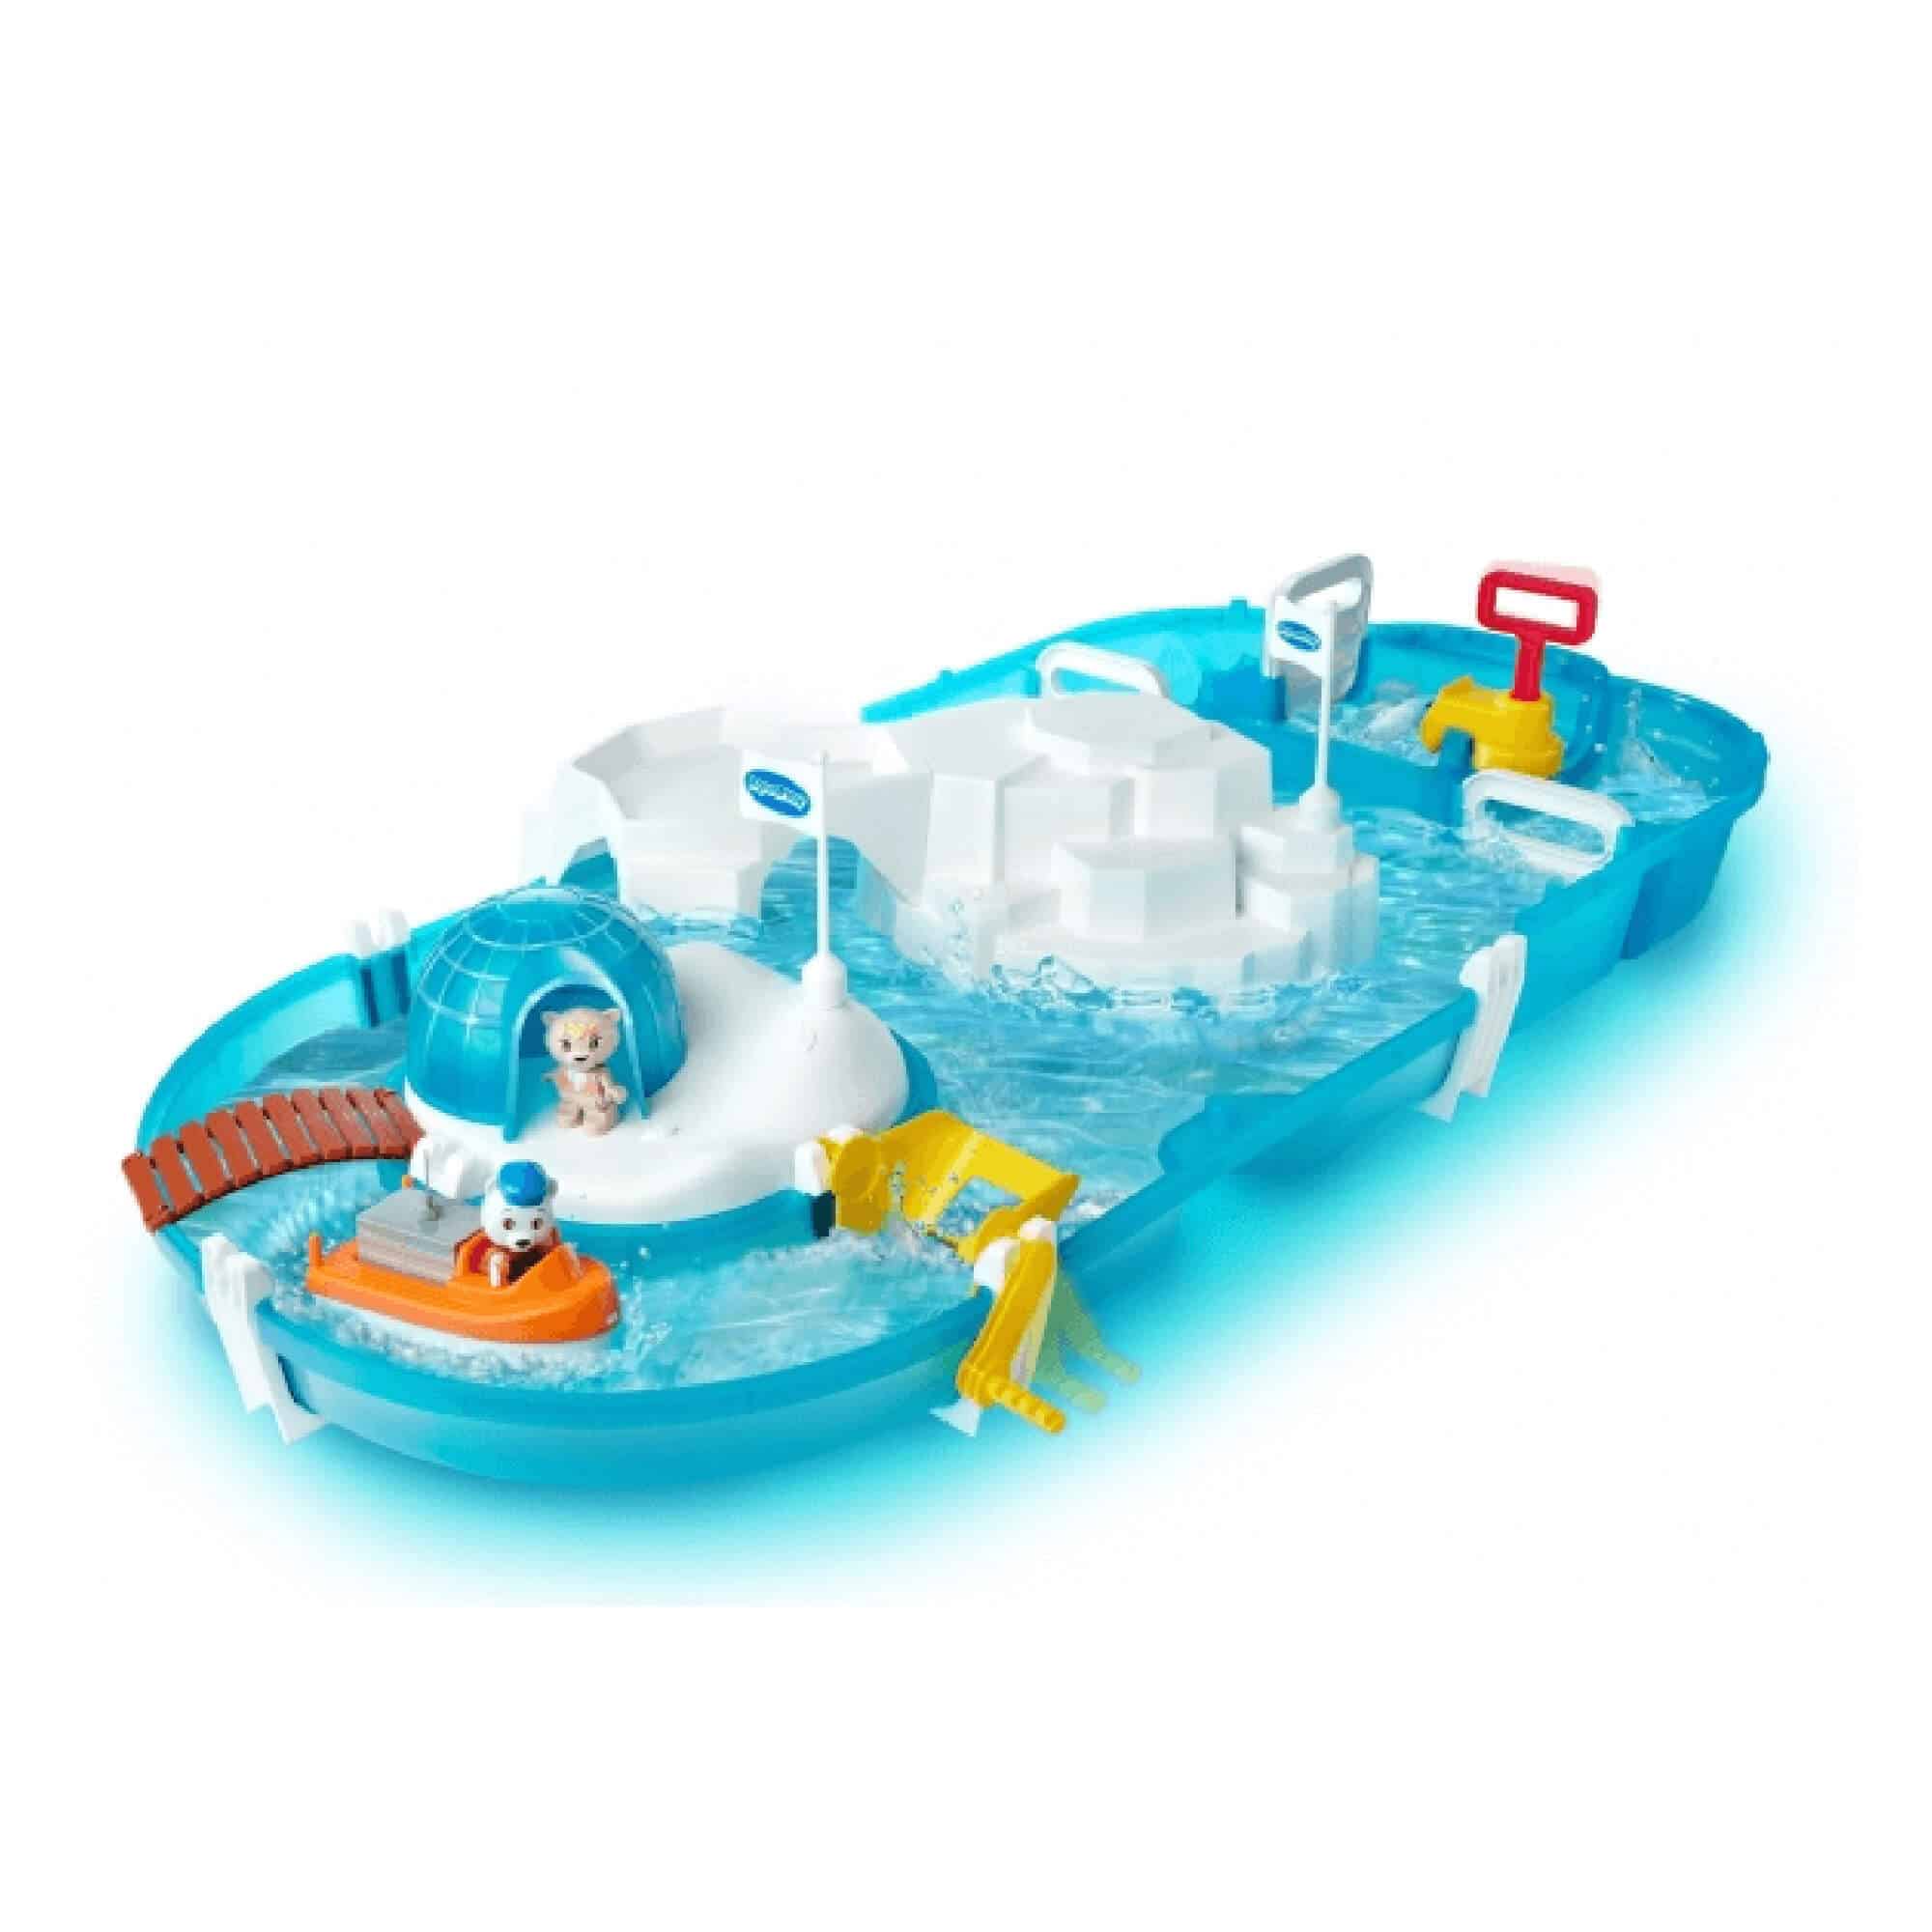 AquaPlay Toys For Water Play Fun